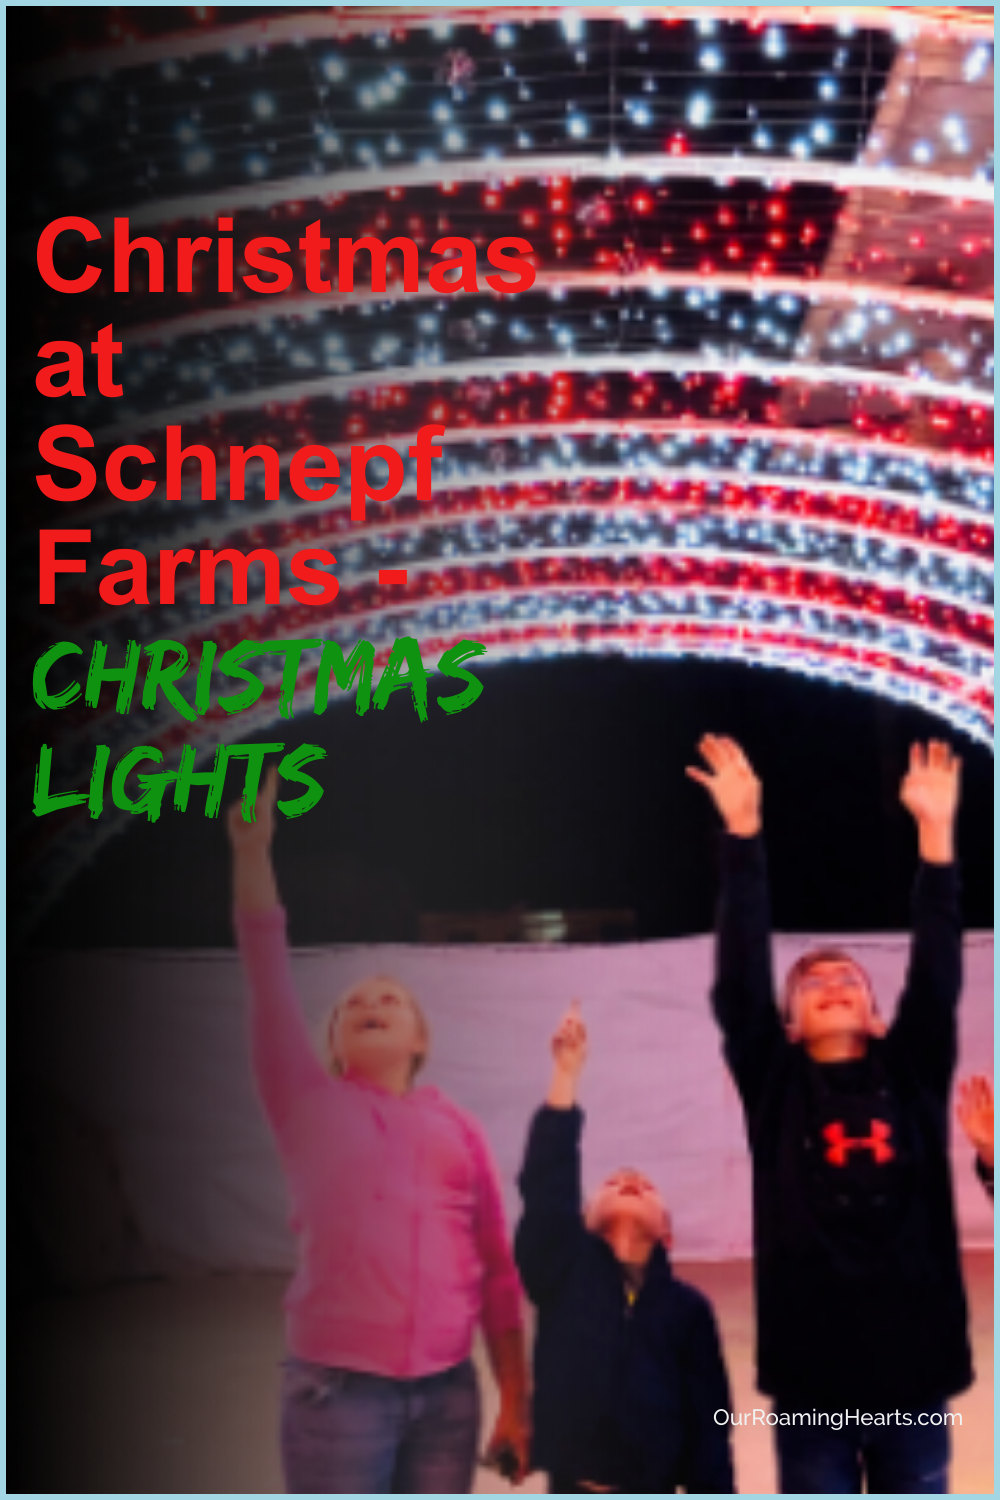 Christmas at Schnepf Farms is truly a winter wonderland that will leave you speechless and provide you with some of the best memories. #christmas #ourroaminghearts #schnepffarms #christmaslights #arizona | Arizona Christmas Lights | Schnepf Farms | Christmas Lights | Family Christmas Fun | Arizona |